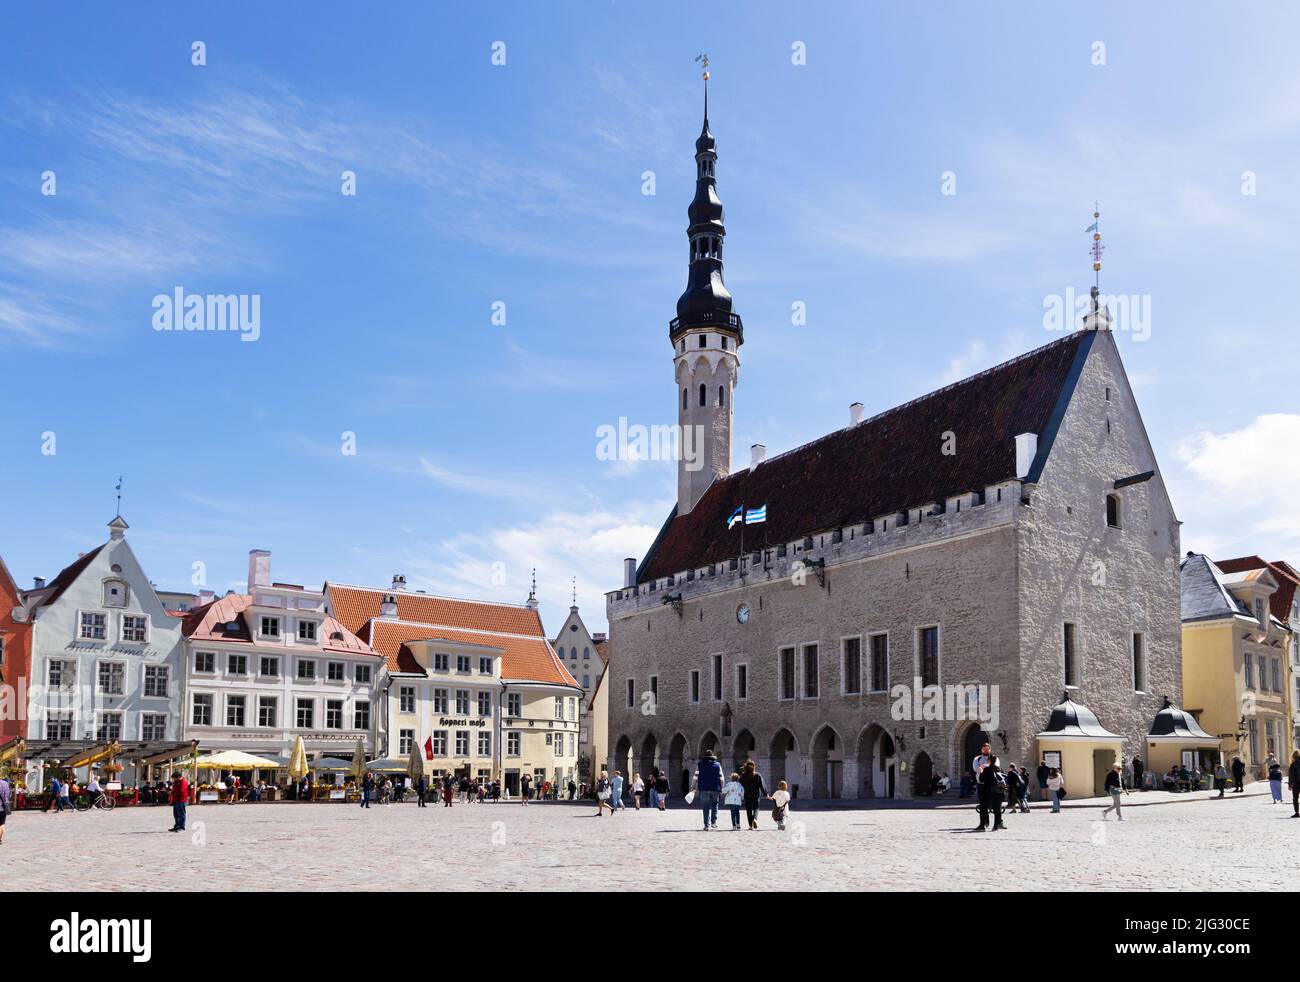 Tallinn Old Town Hall Square, and the Town Hall dating from the 1500s, now a popular tourist destination for travel and a city break, Tallinn Estonia Stock Photo